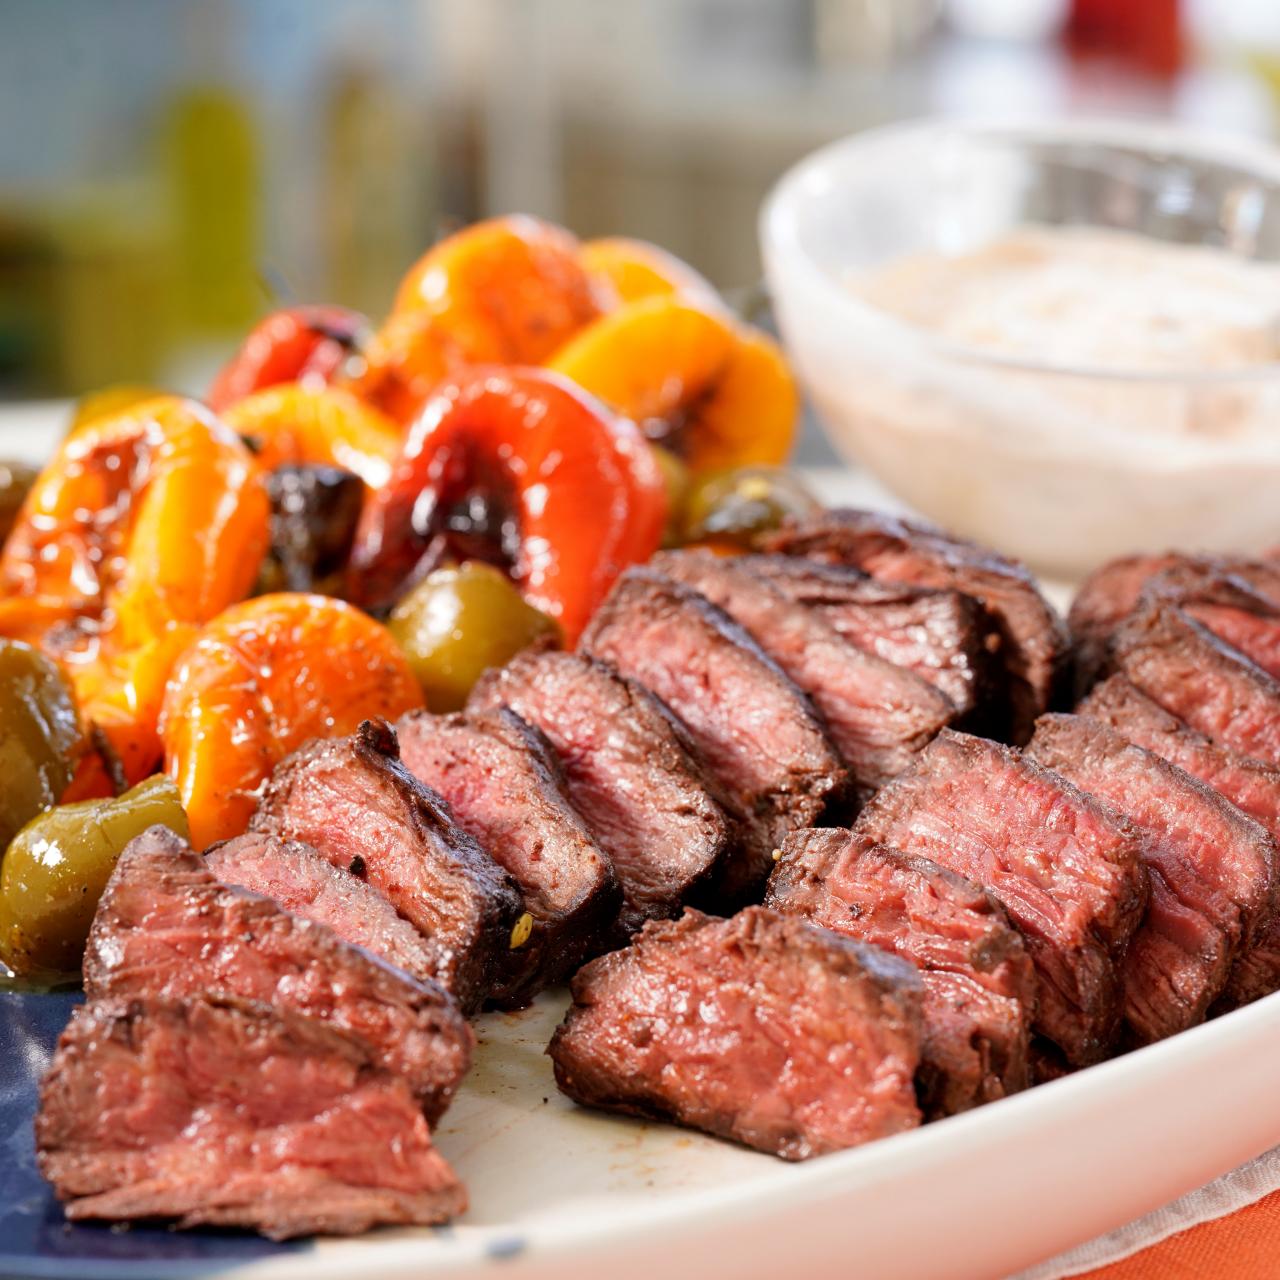 https://food.fnr.sndimg.com/content/dam/images/food/fullset/2022/06/16/KC3103-geoffrey-zakarian-dry-rubbed-hanger-steak-with-smoky-aioli-and-charred-peppers.jpg.rend.hgtvcom.1280.1280.suffix/1655392129085.jpeg